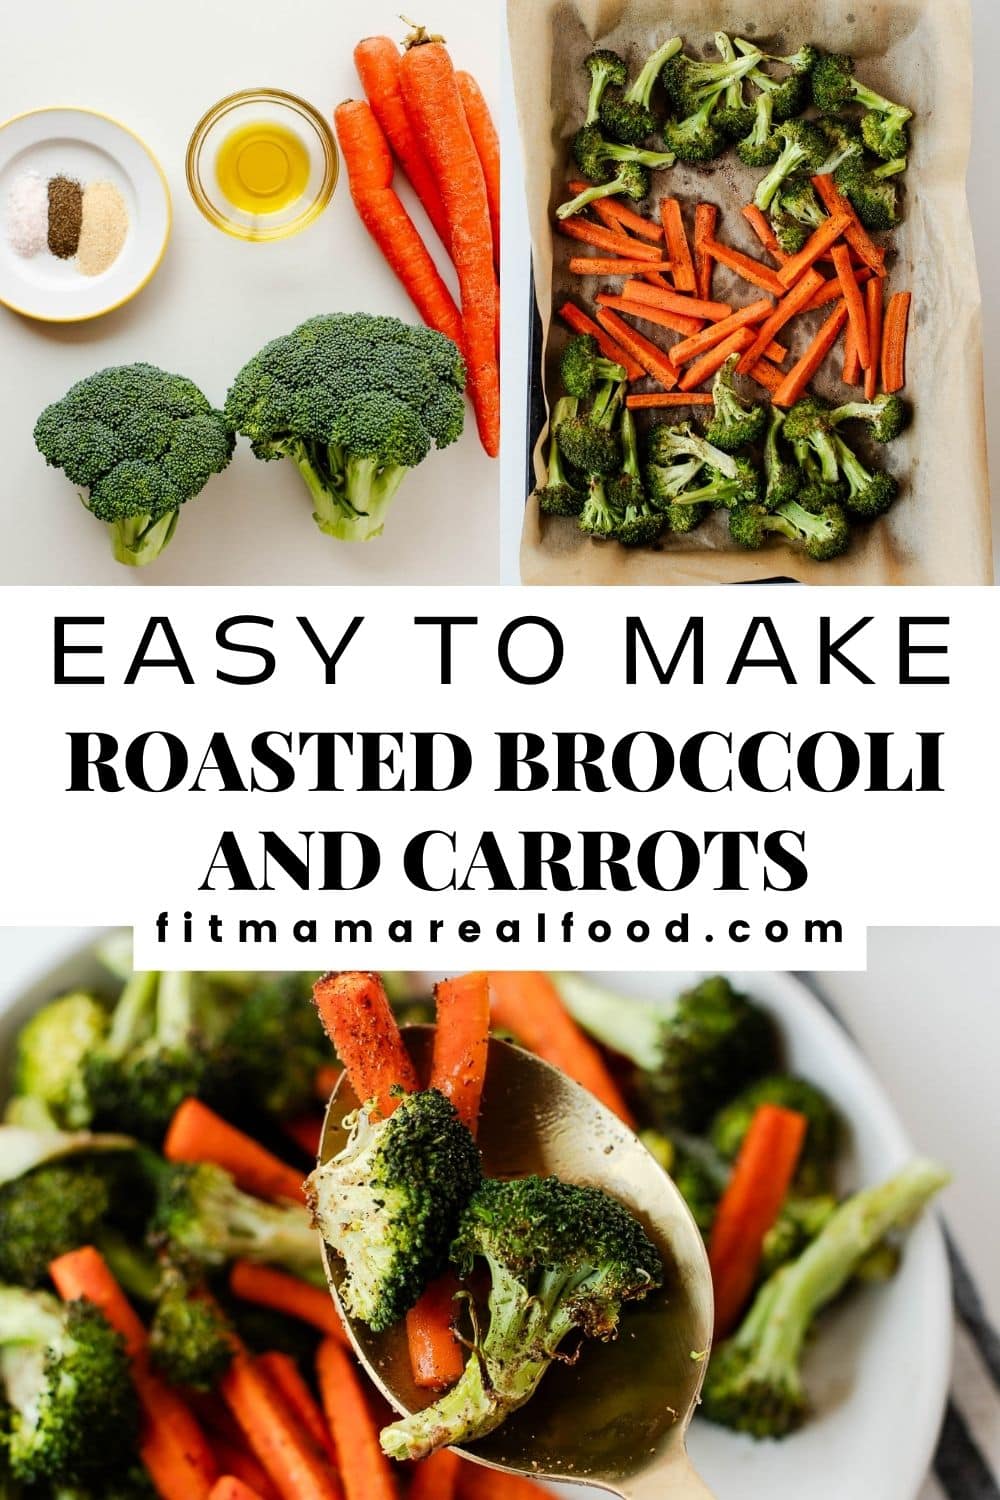 easy to make roasted broccoli and carrots recipe